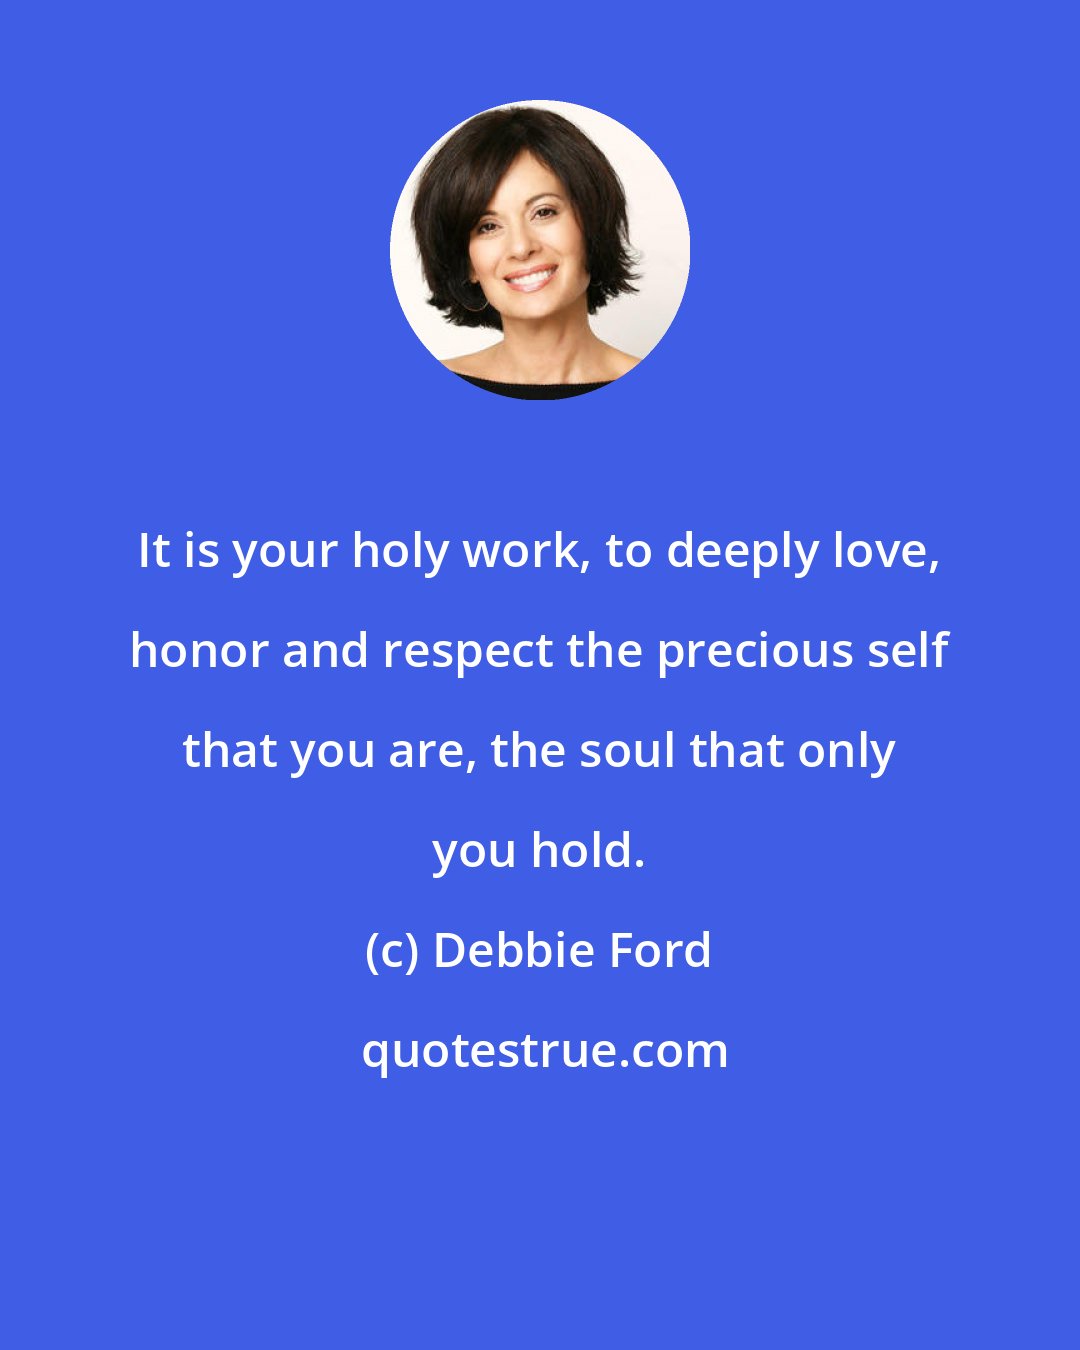 Debbie Ford: It is your holy work, to deeply love, honor and respect the precious self that you are, the soul that only you hold.